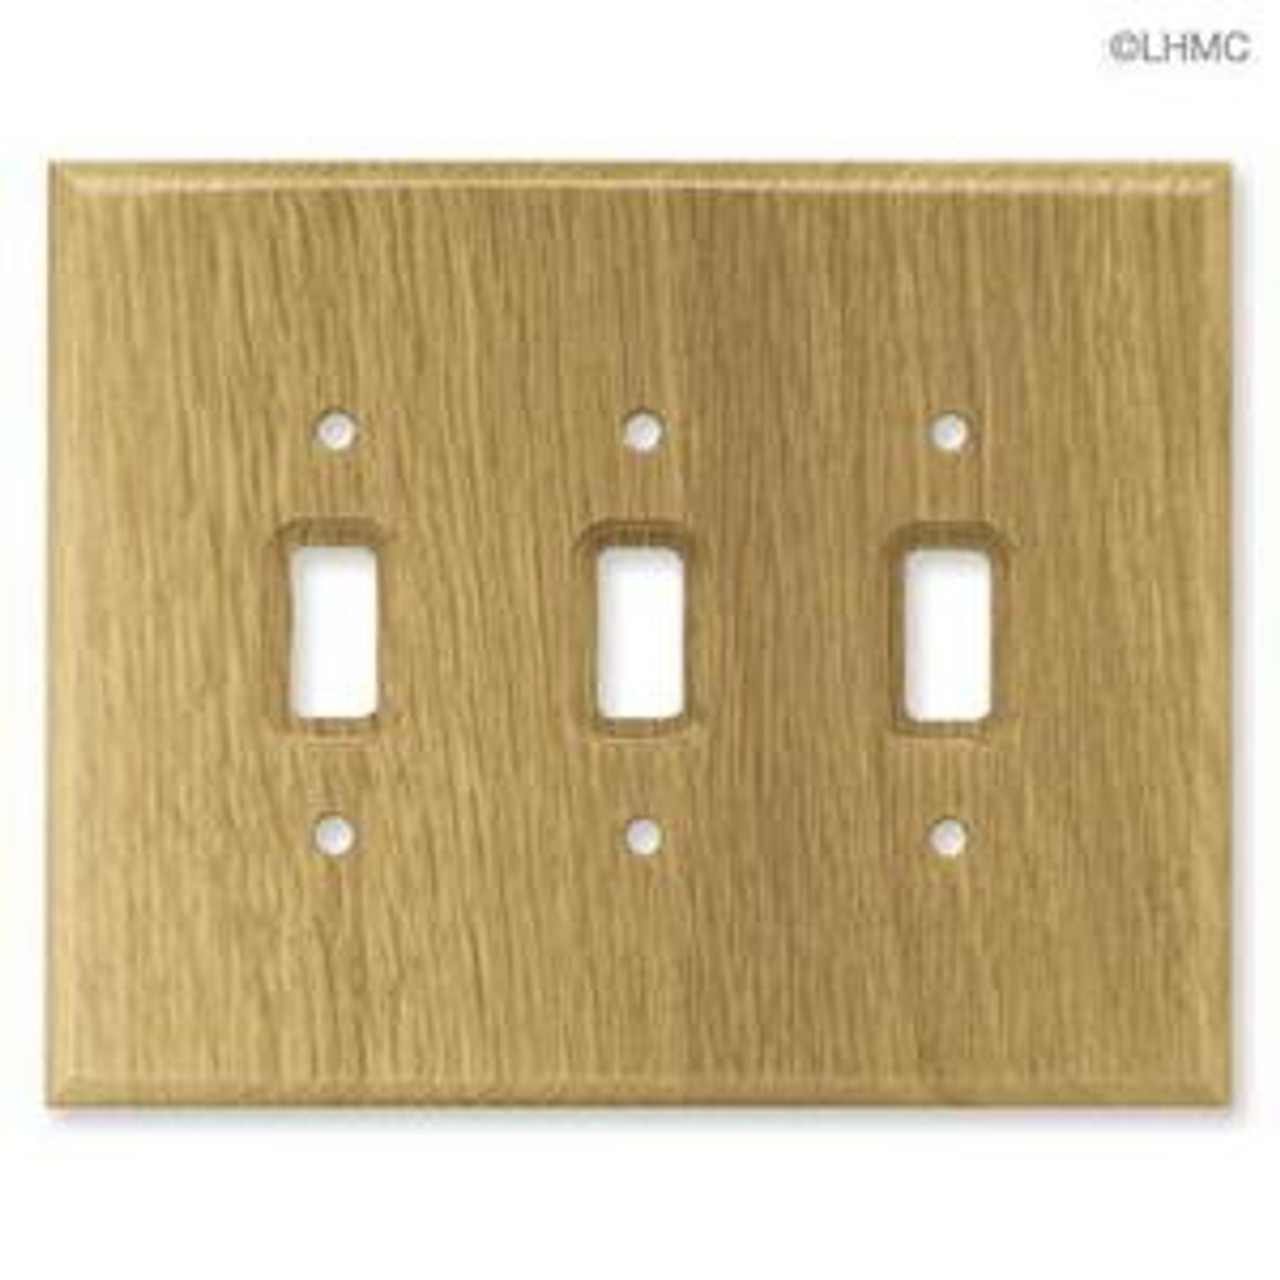 126430 Medium Oak Wood Triple Switch Outlet Cover Wall Plate